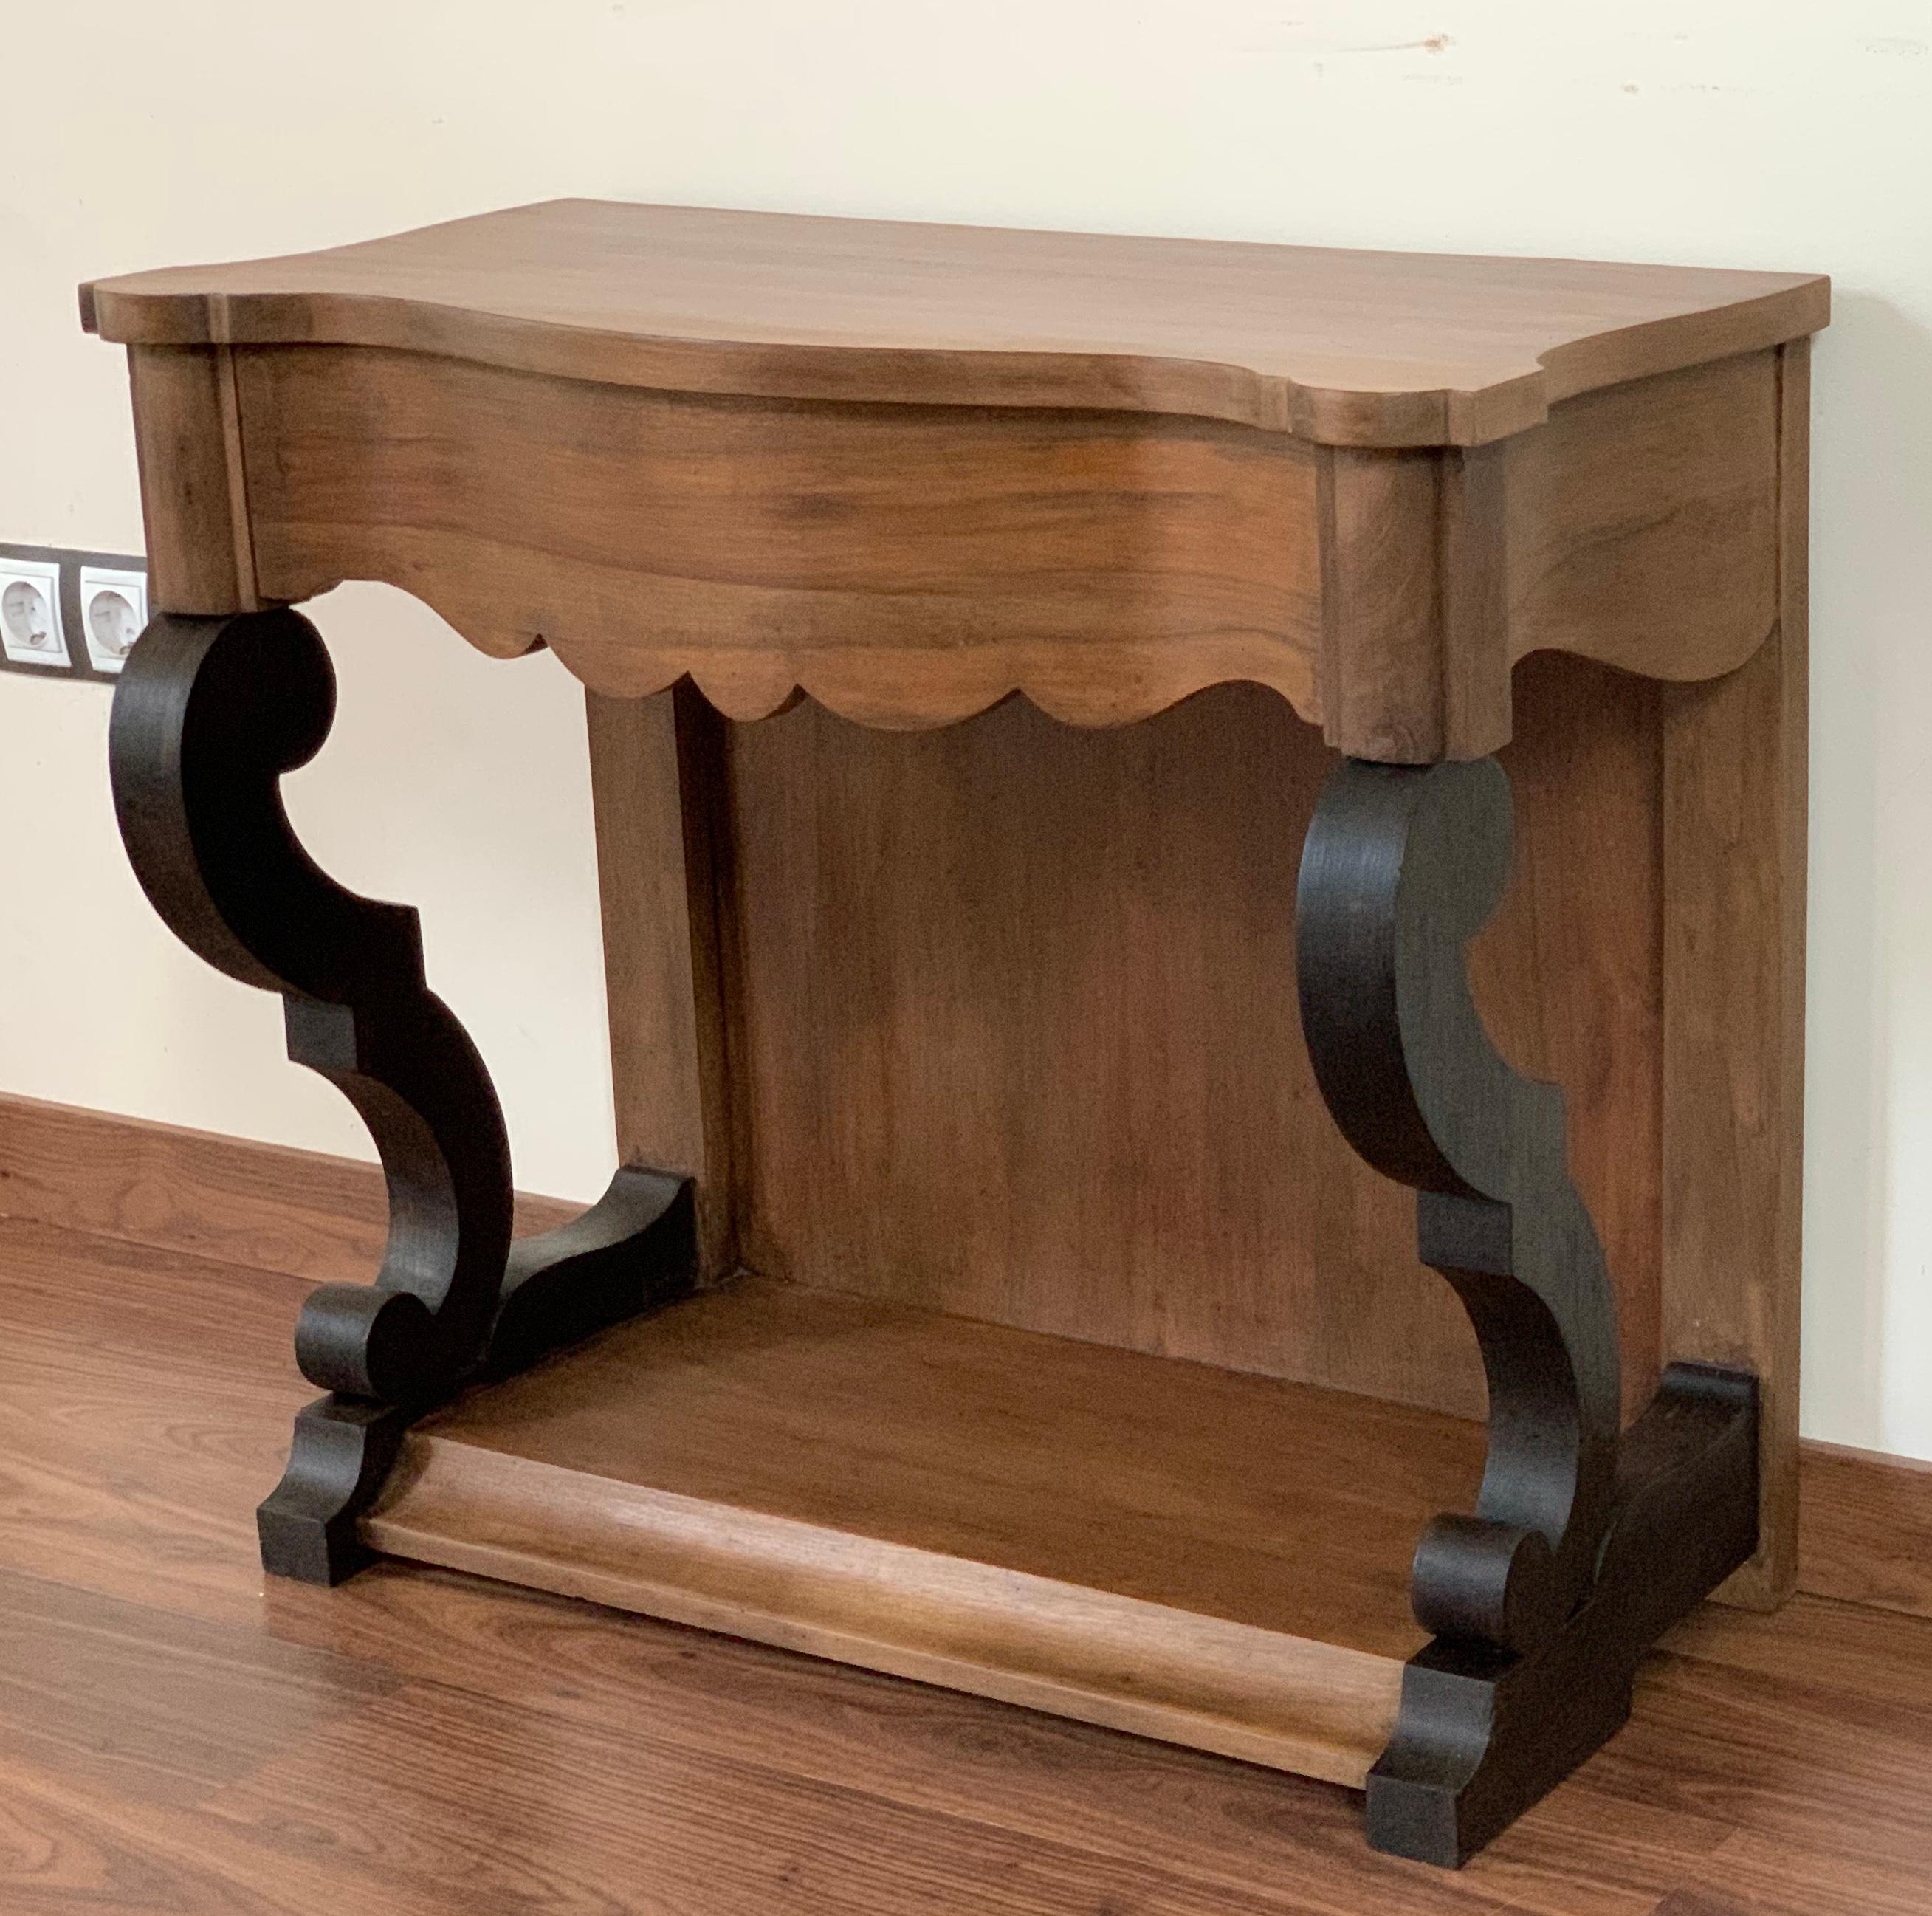 Empire Revival 19th Century Low Pair of Console Tables or Nightstands in Mahogany For Sale